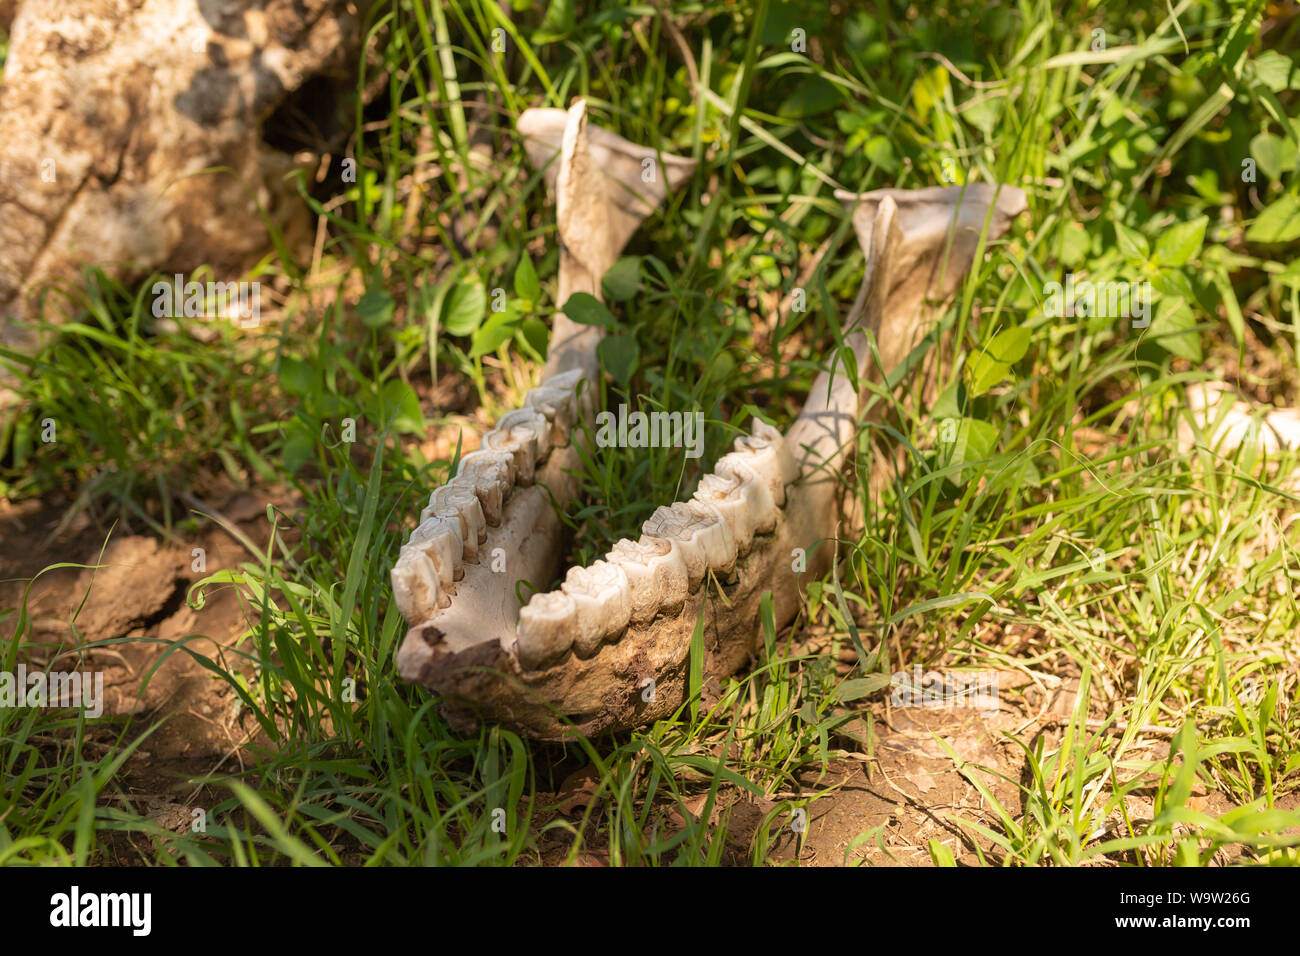 Colour photograph of single large animal mandible jawbone positioned within grass in landscape orientation, taken in Kenya. Stock Photo